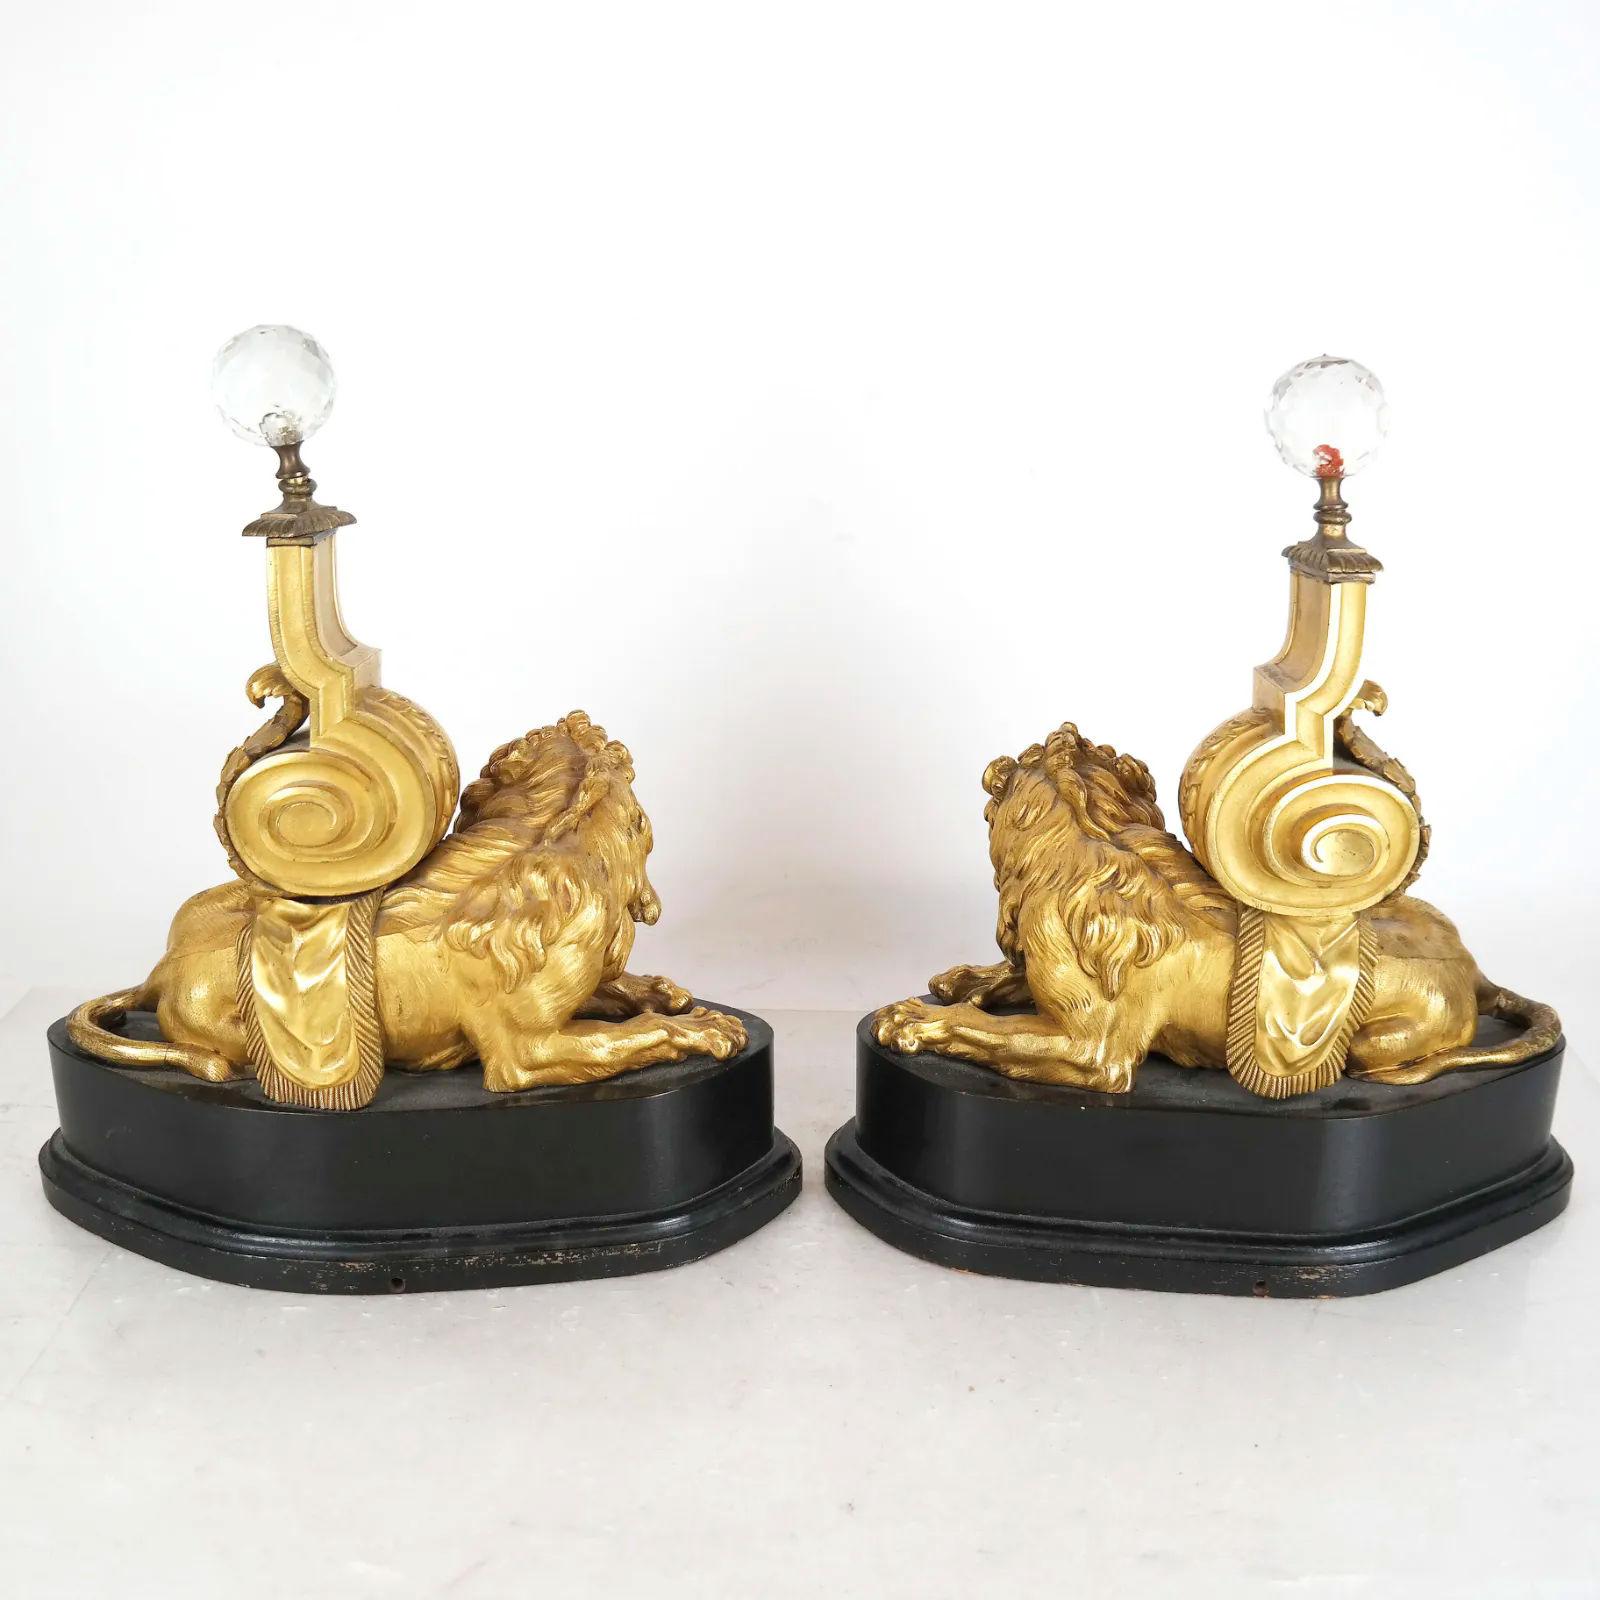 Regency Revival Gilt Bronze Lion Form Chenets Andirons Mounted as Table Lamps For Sale